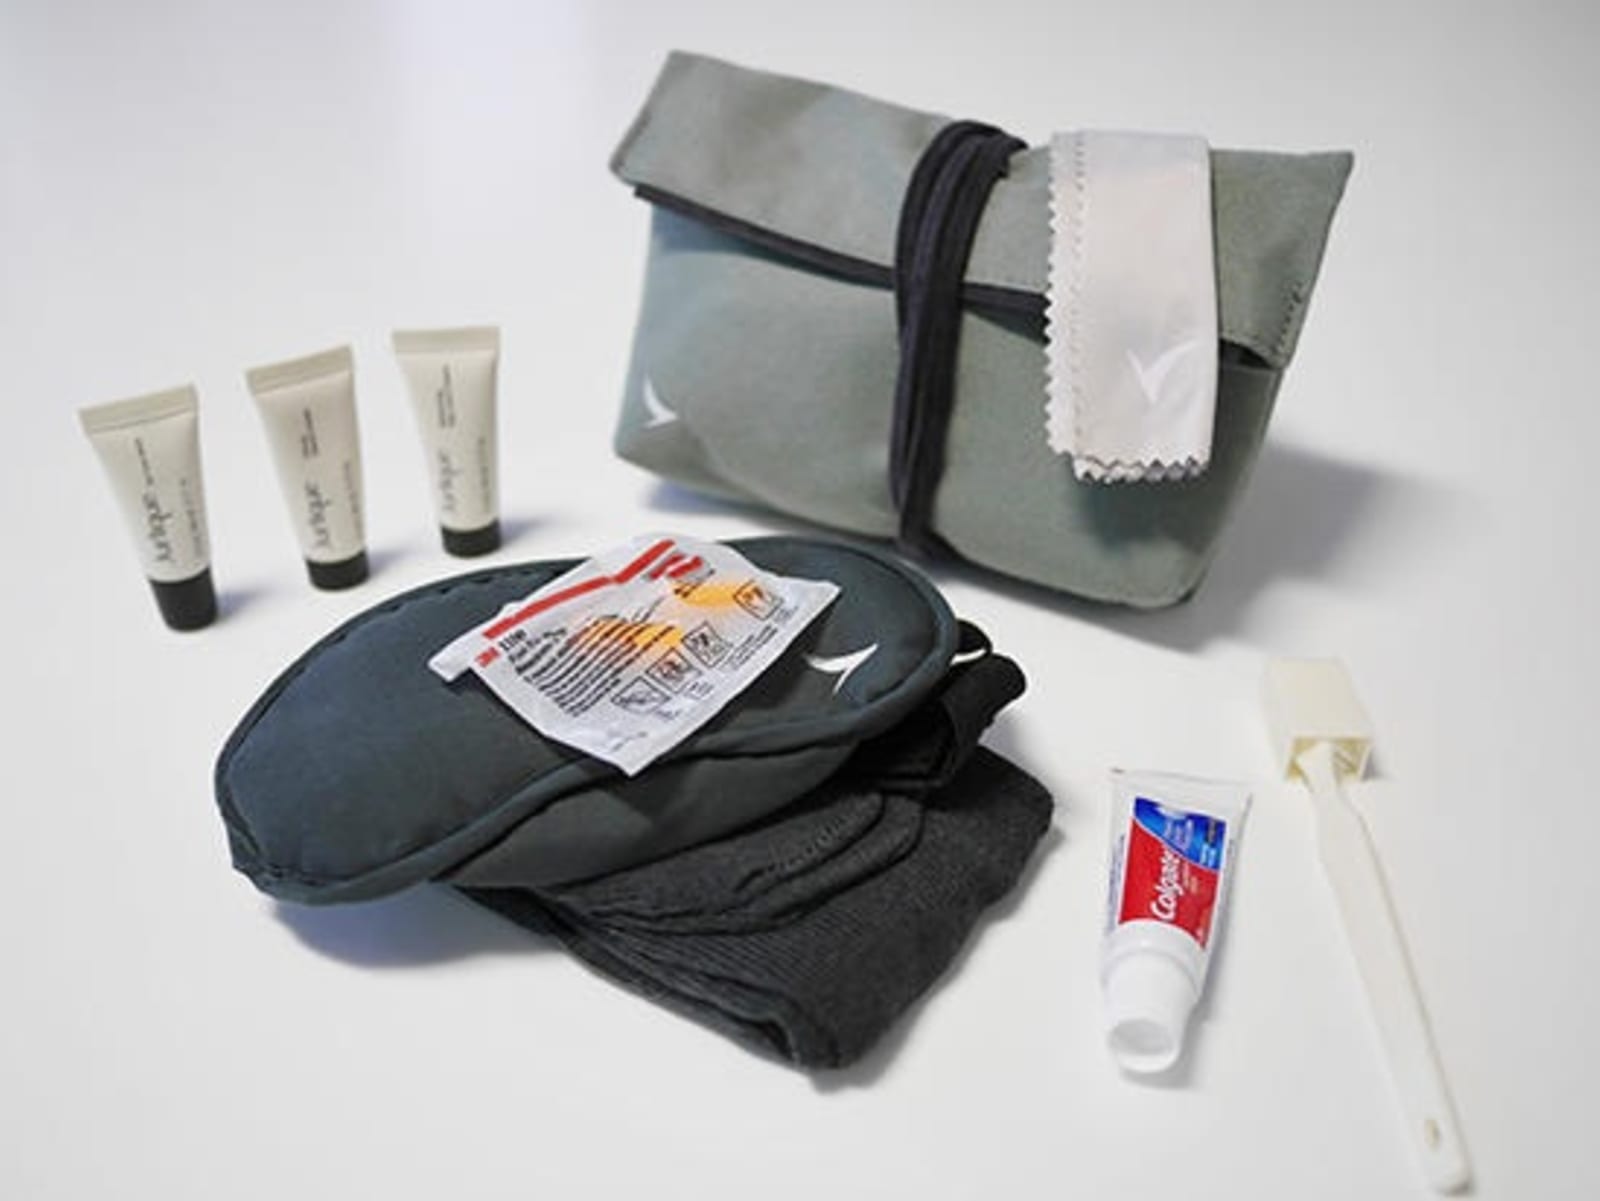 6 stylish amenity kits you'll find in business and first class - The Peak  Magazine